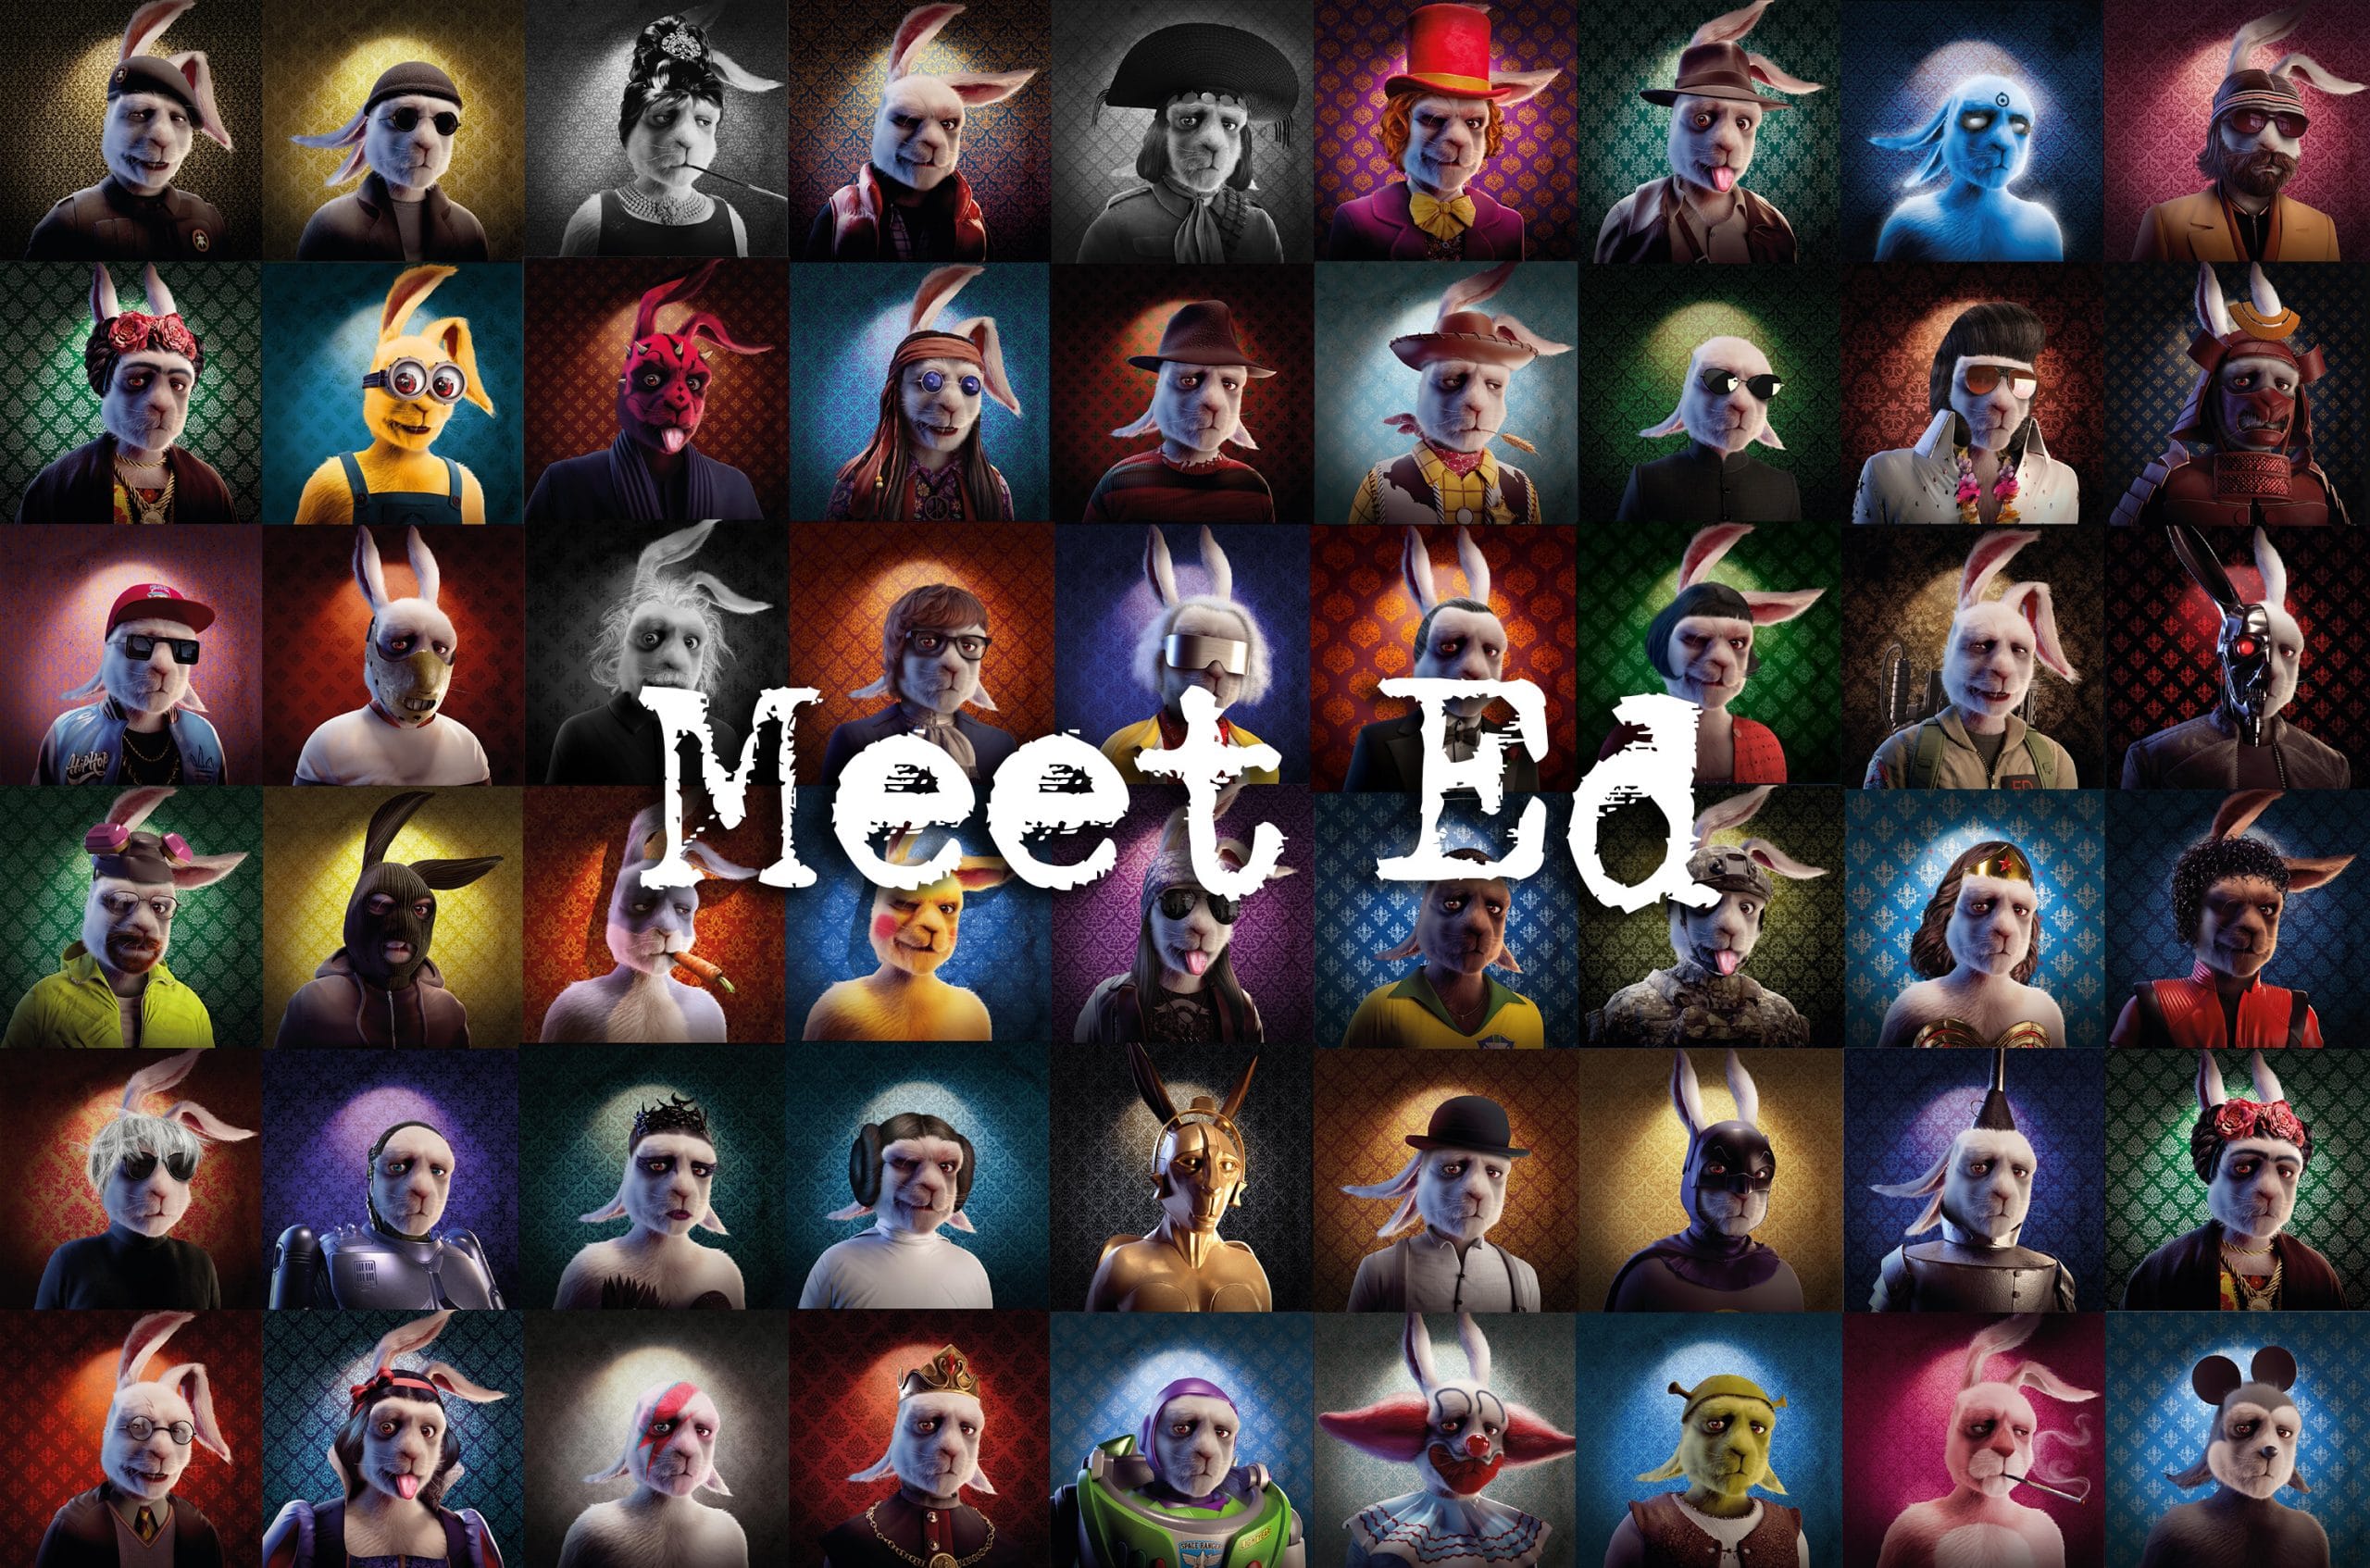 Meet Ed is an NFT funding campaign by Hype Animation to fund its latest animated feature film "Ed". 